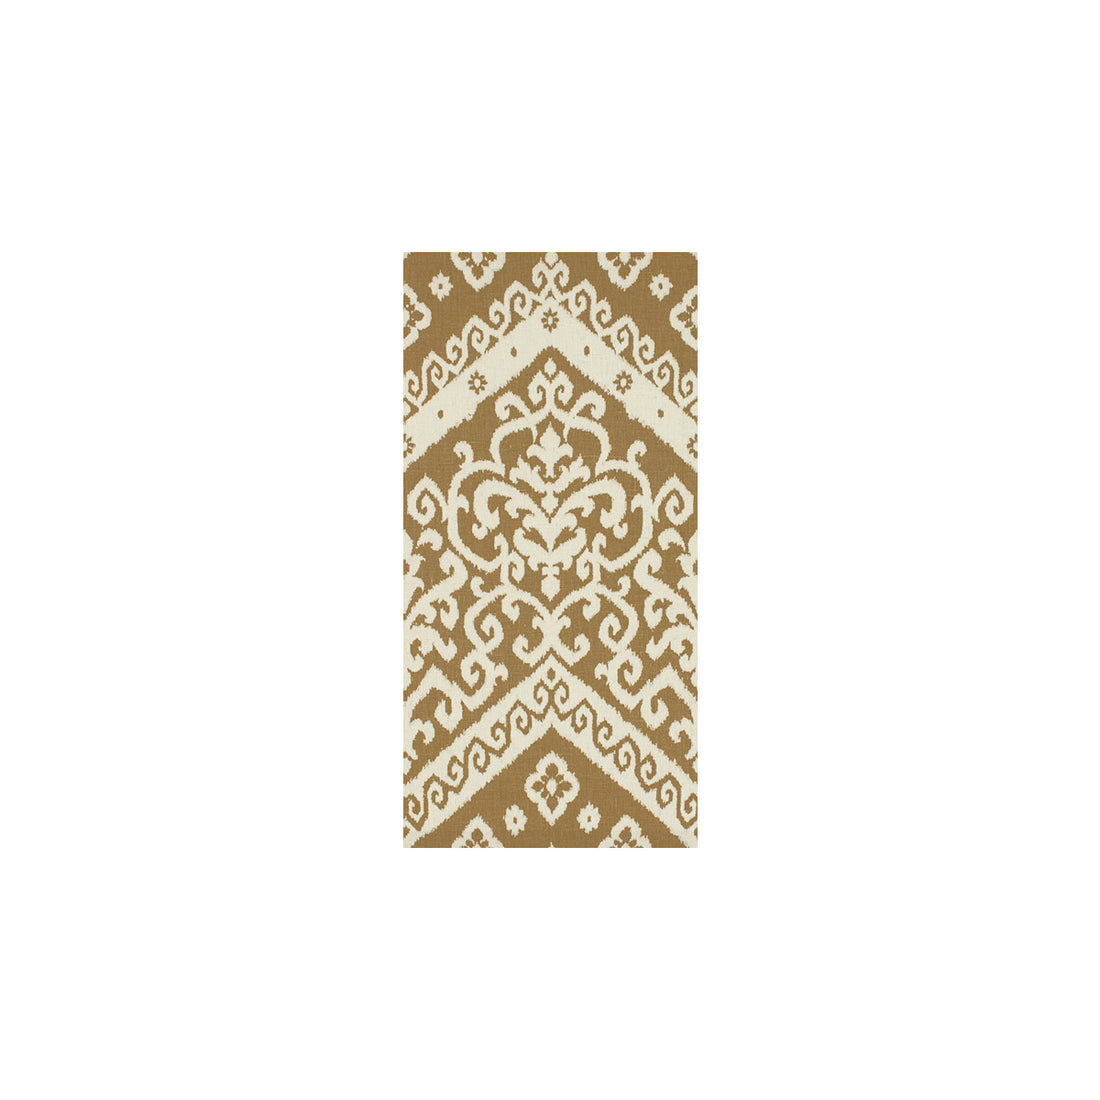 Dressur fabric in wicker color - pattern DRESSUR.6.0 - by Kravet Design in the Barclay Butera collection